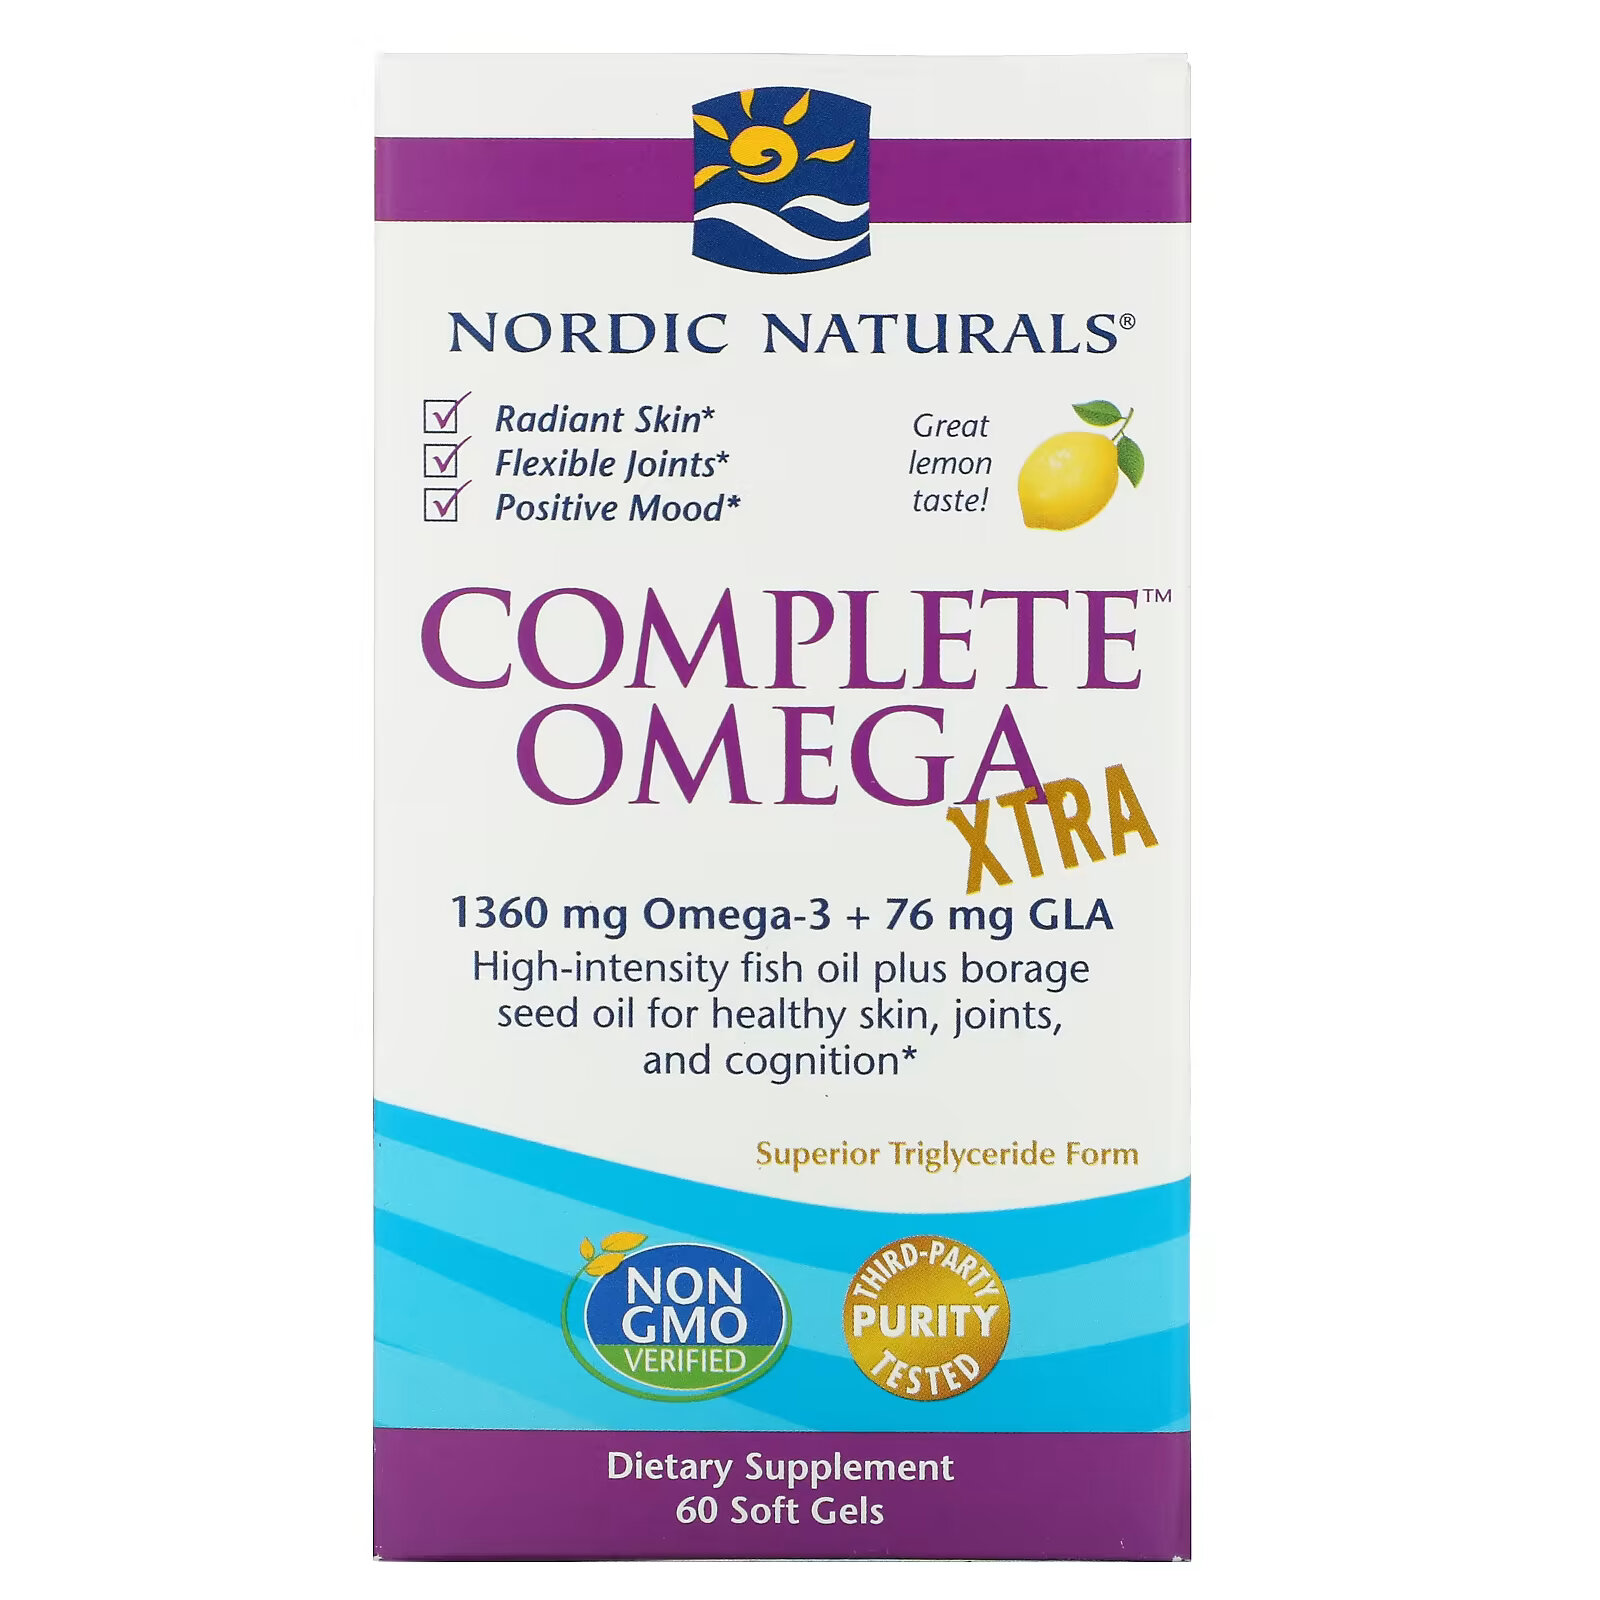 nordic naturals omega joint xtra 1000 мг 90 гелевых капсул Nordic Naturals, Complete Omega Xtra со вкусом лимона, 680 мг, 60 мягких желатиновых капсул